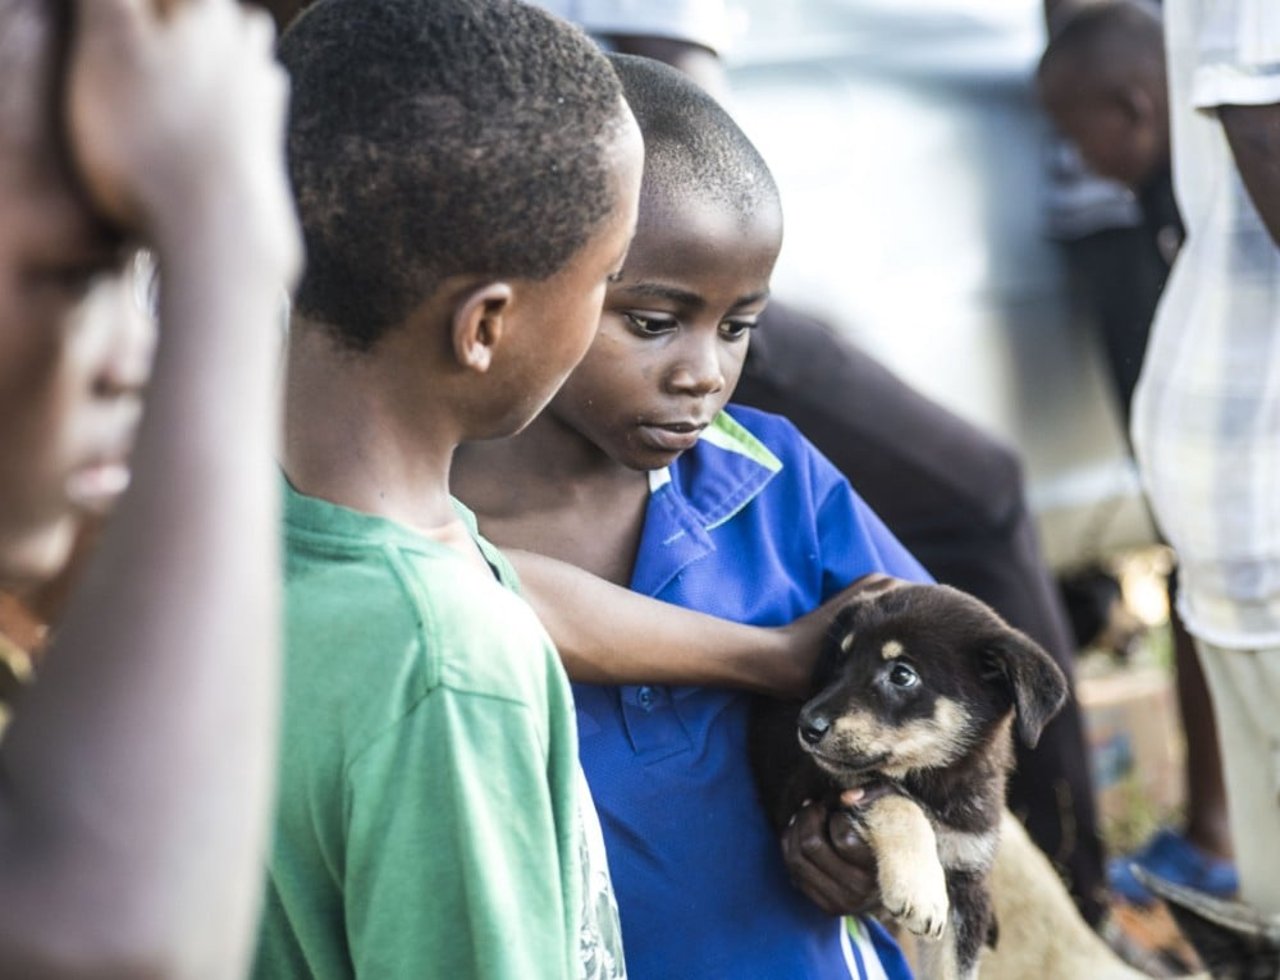 Young boys petting a dog in Mombasa.